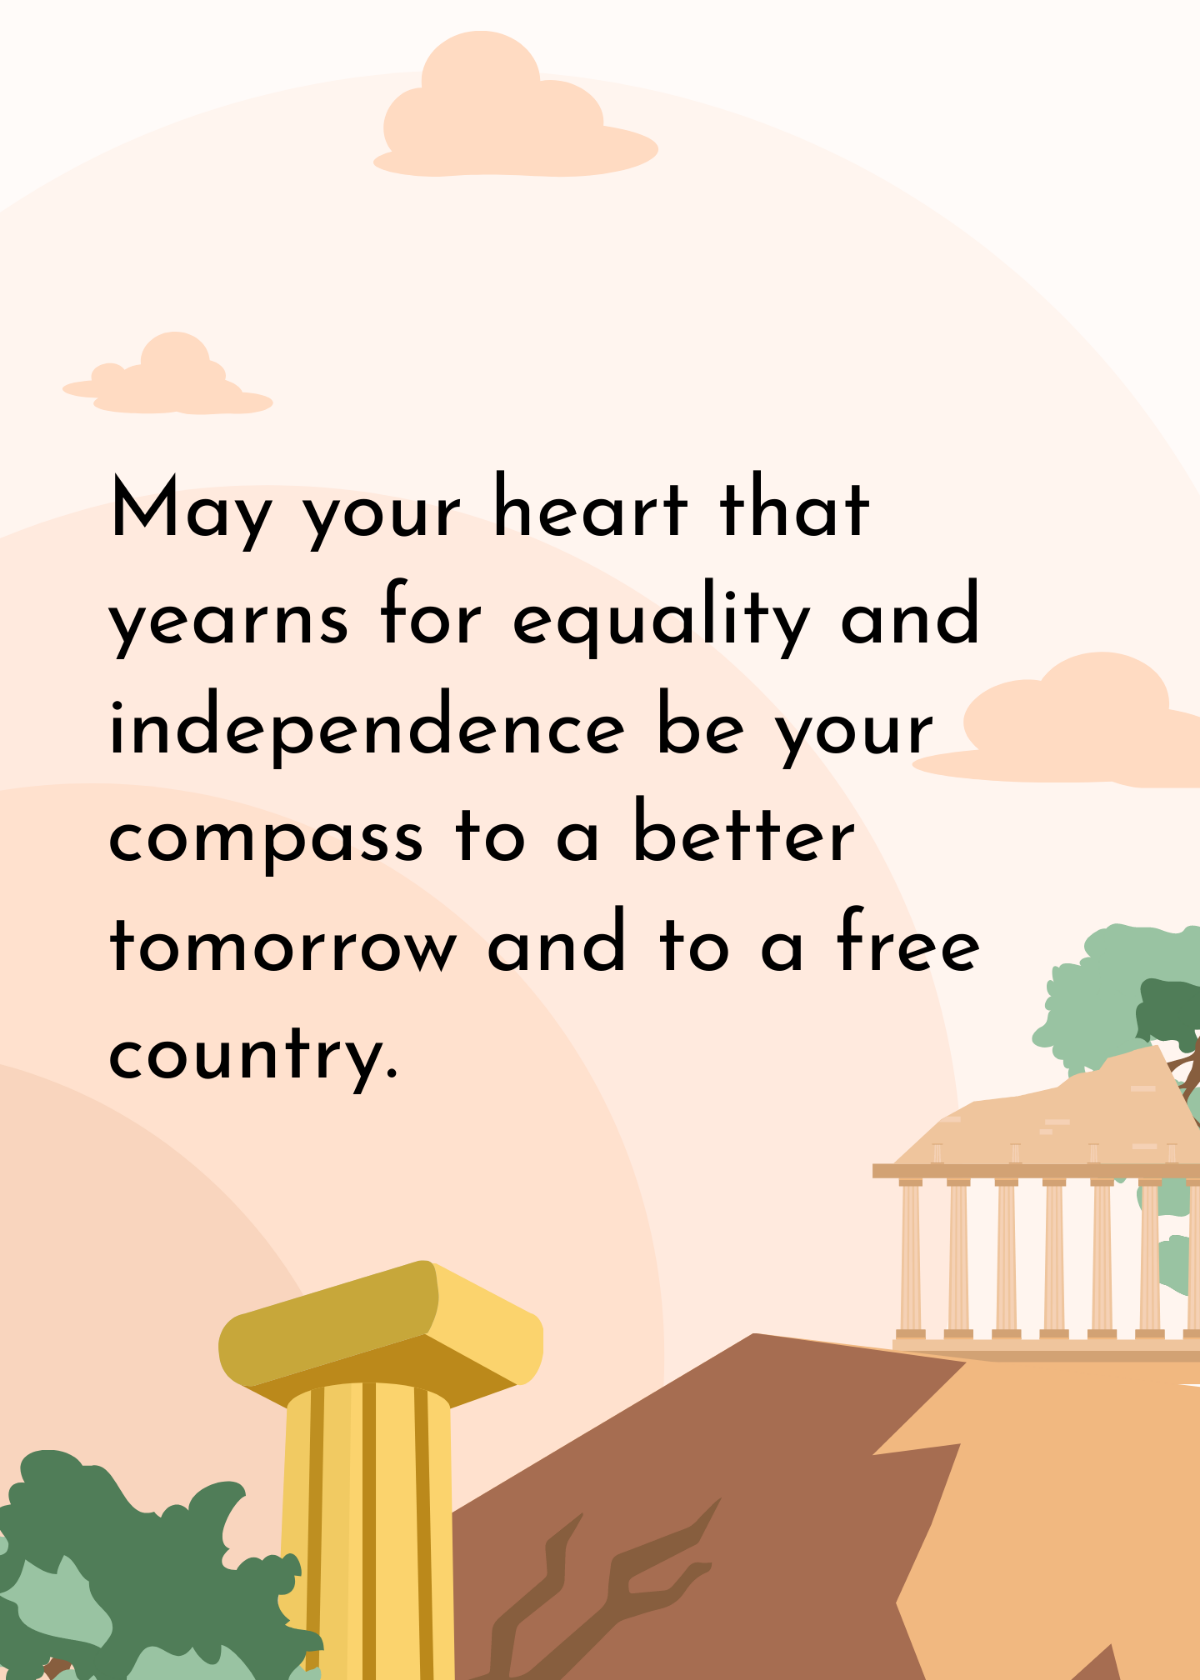 Free Cyprus National Day Wishes Template